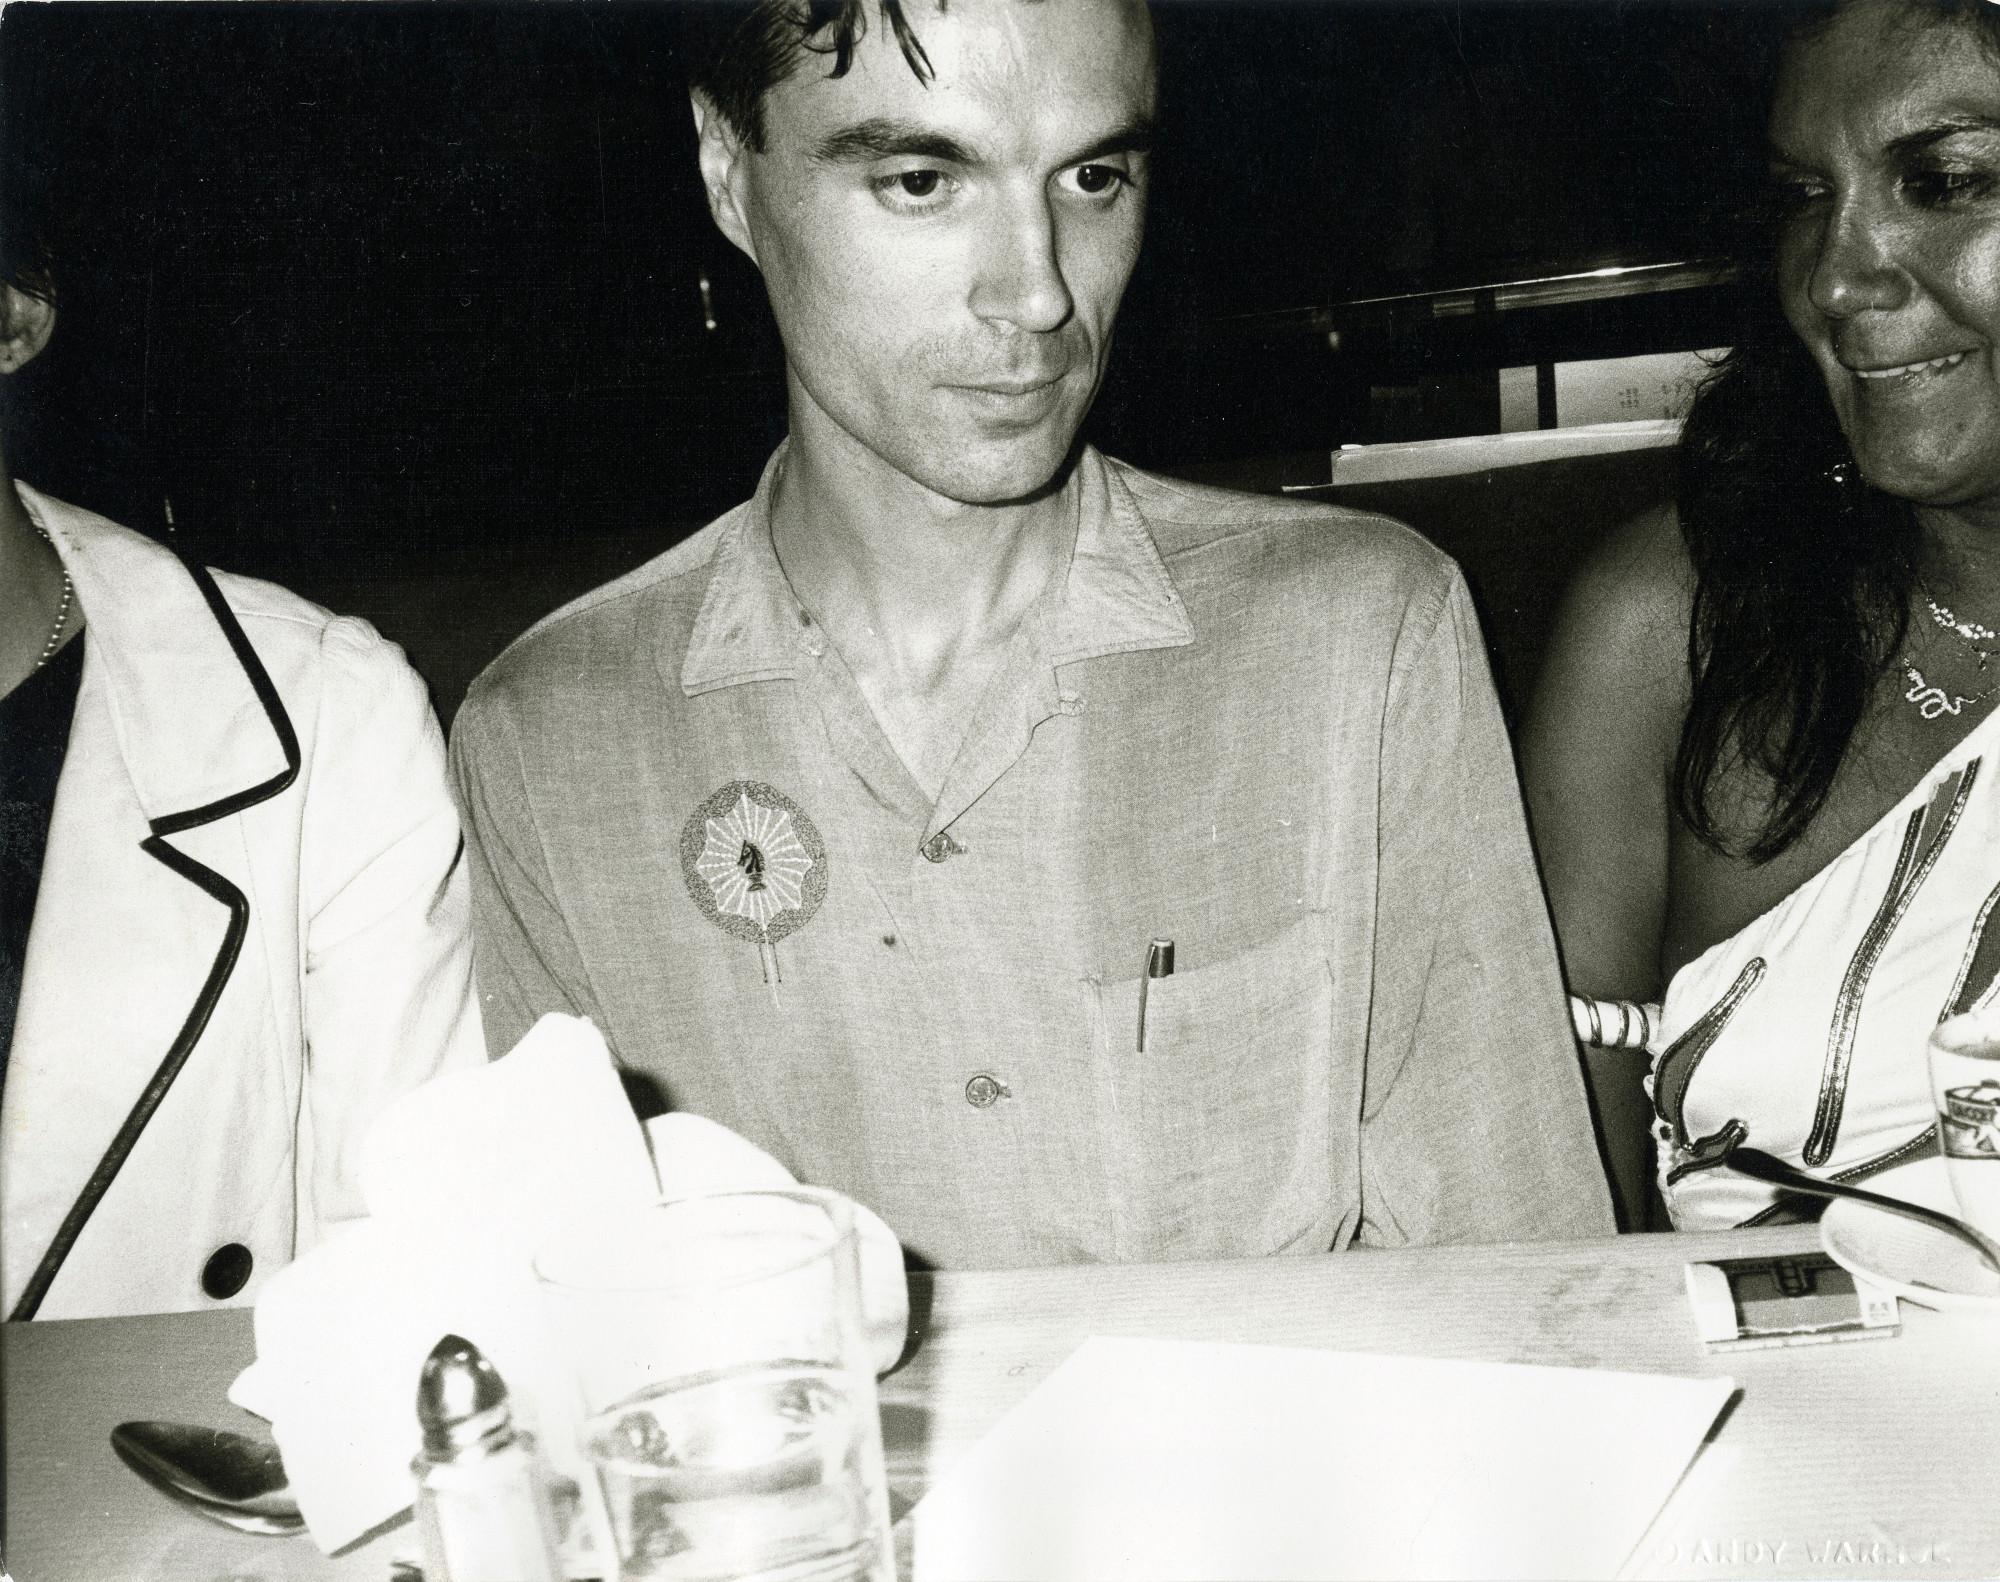 Black and White Photograph Andy Warhol - David Byrne